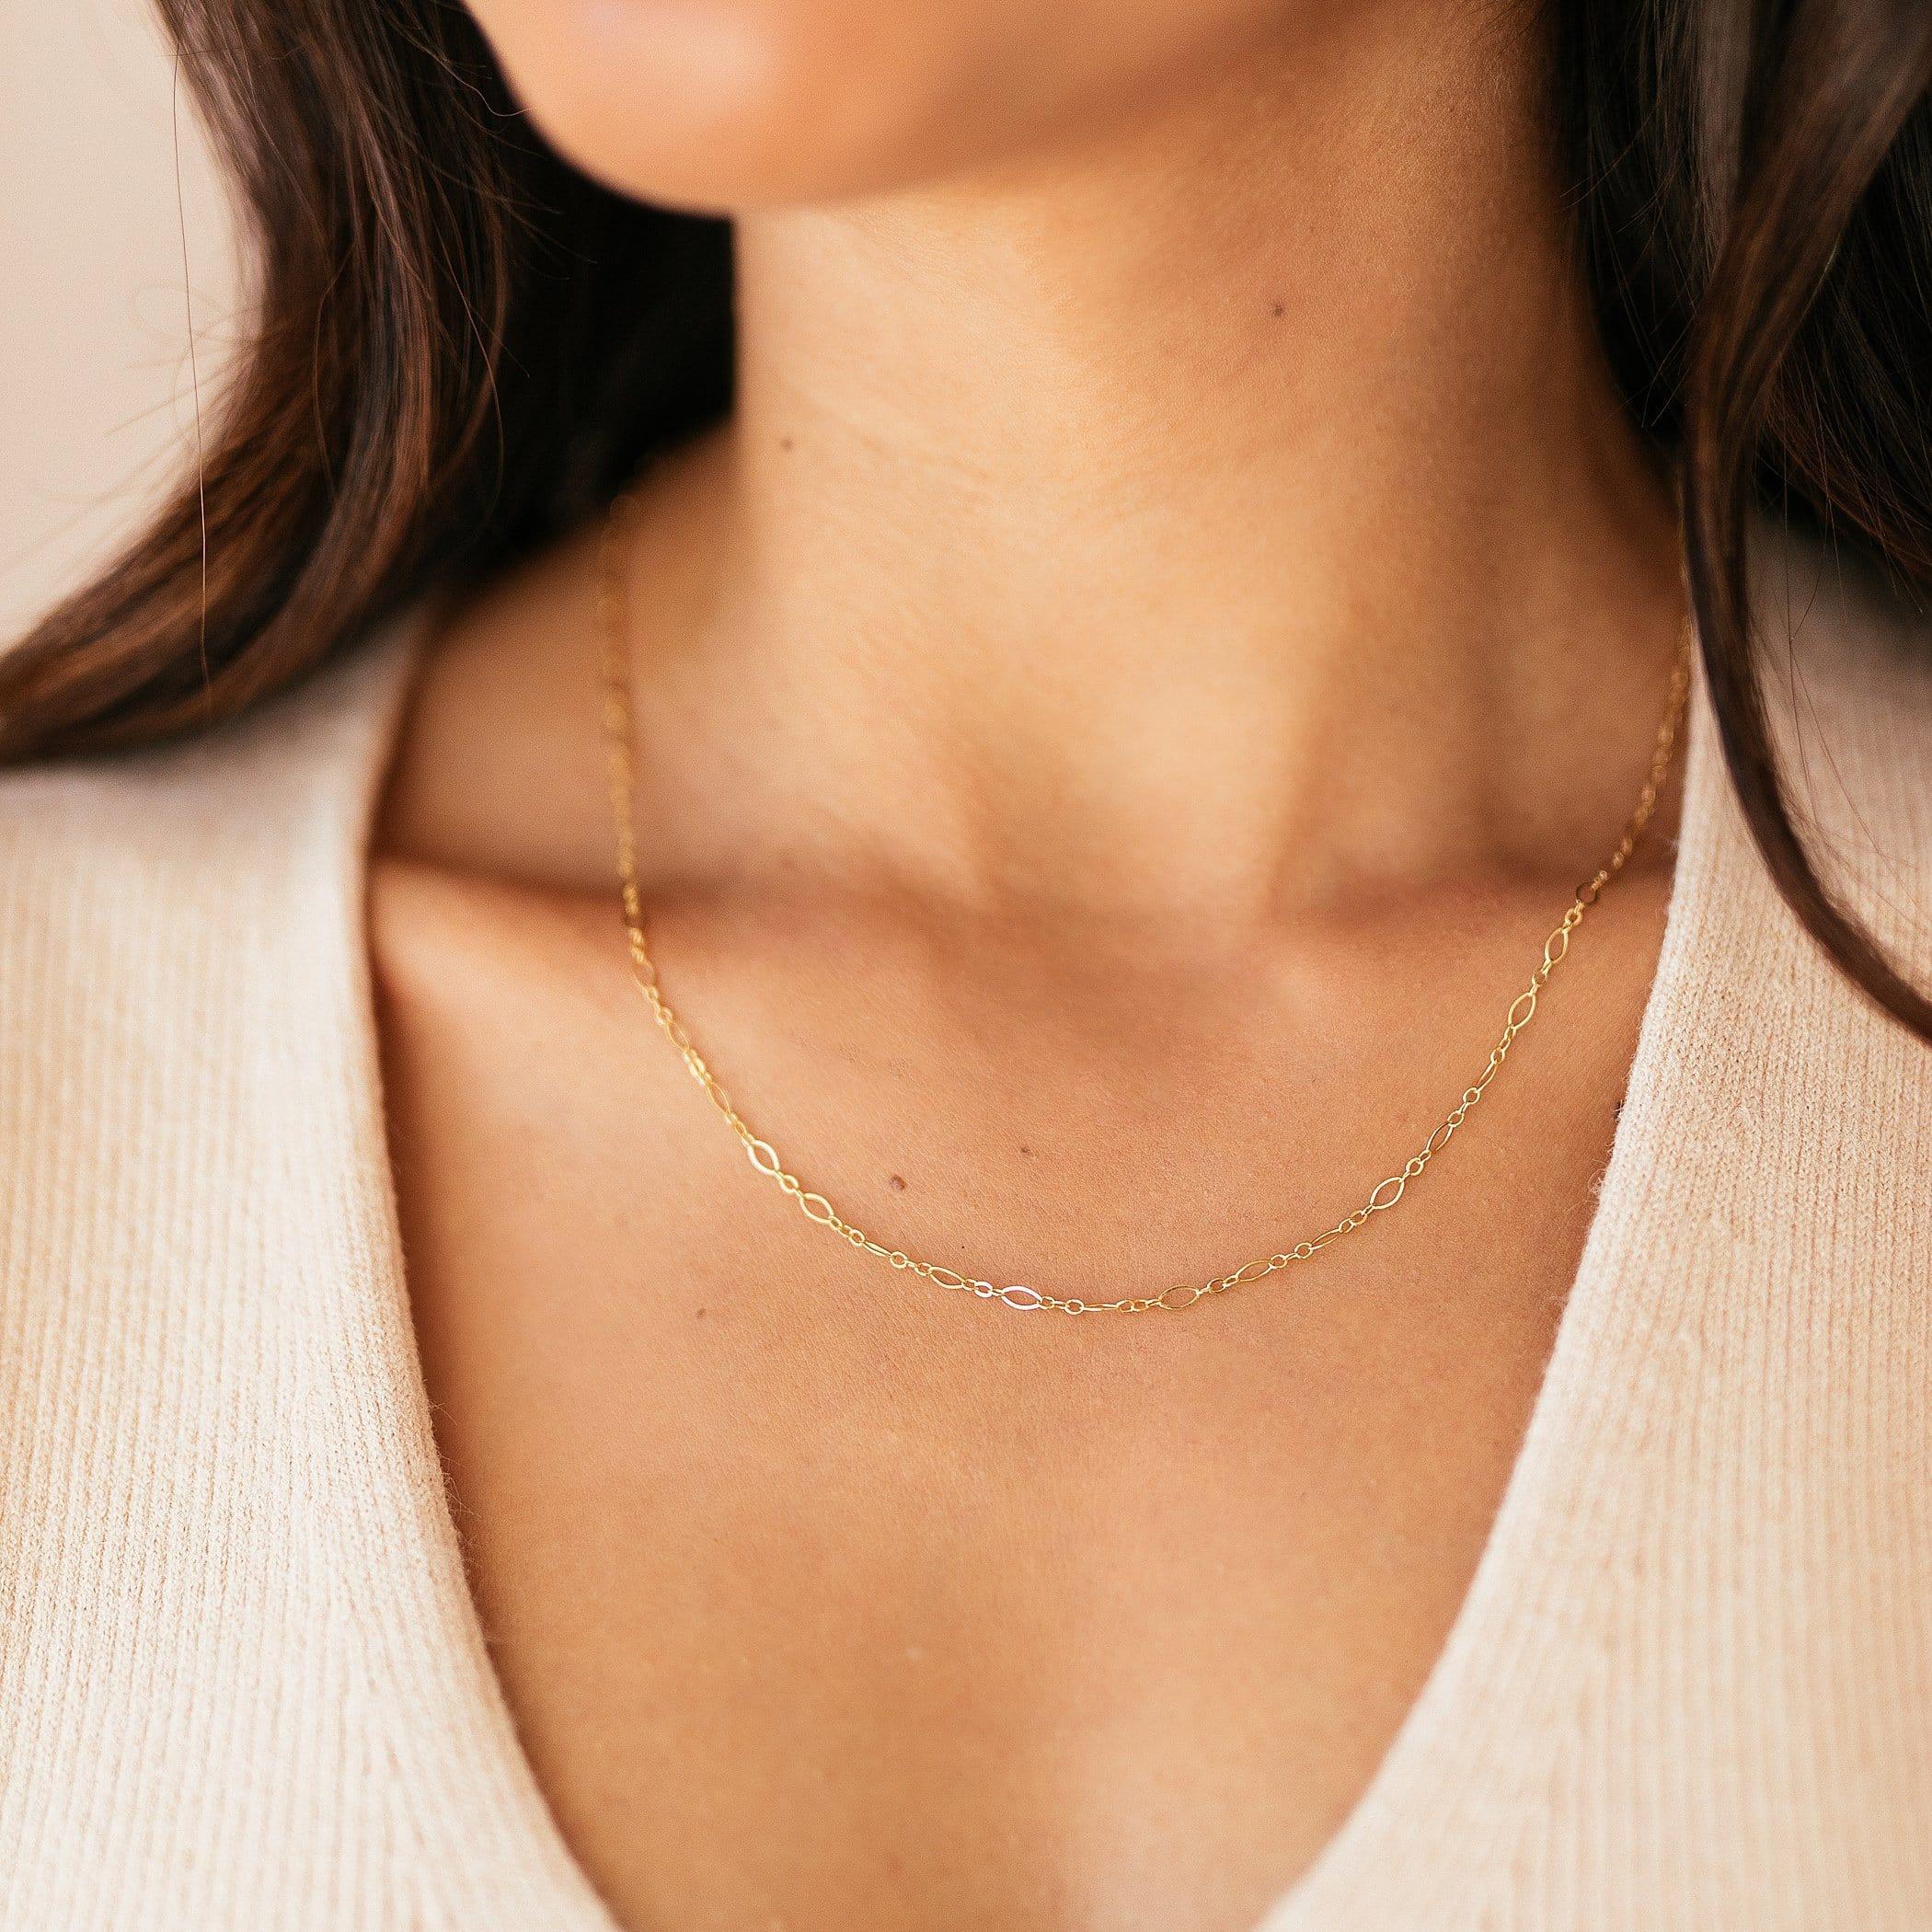 Sweet Chain Necklace - Nolia Jewelry - Meaningful + Sustainably Handcrafted Jewelry